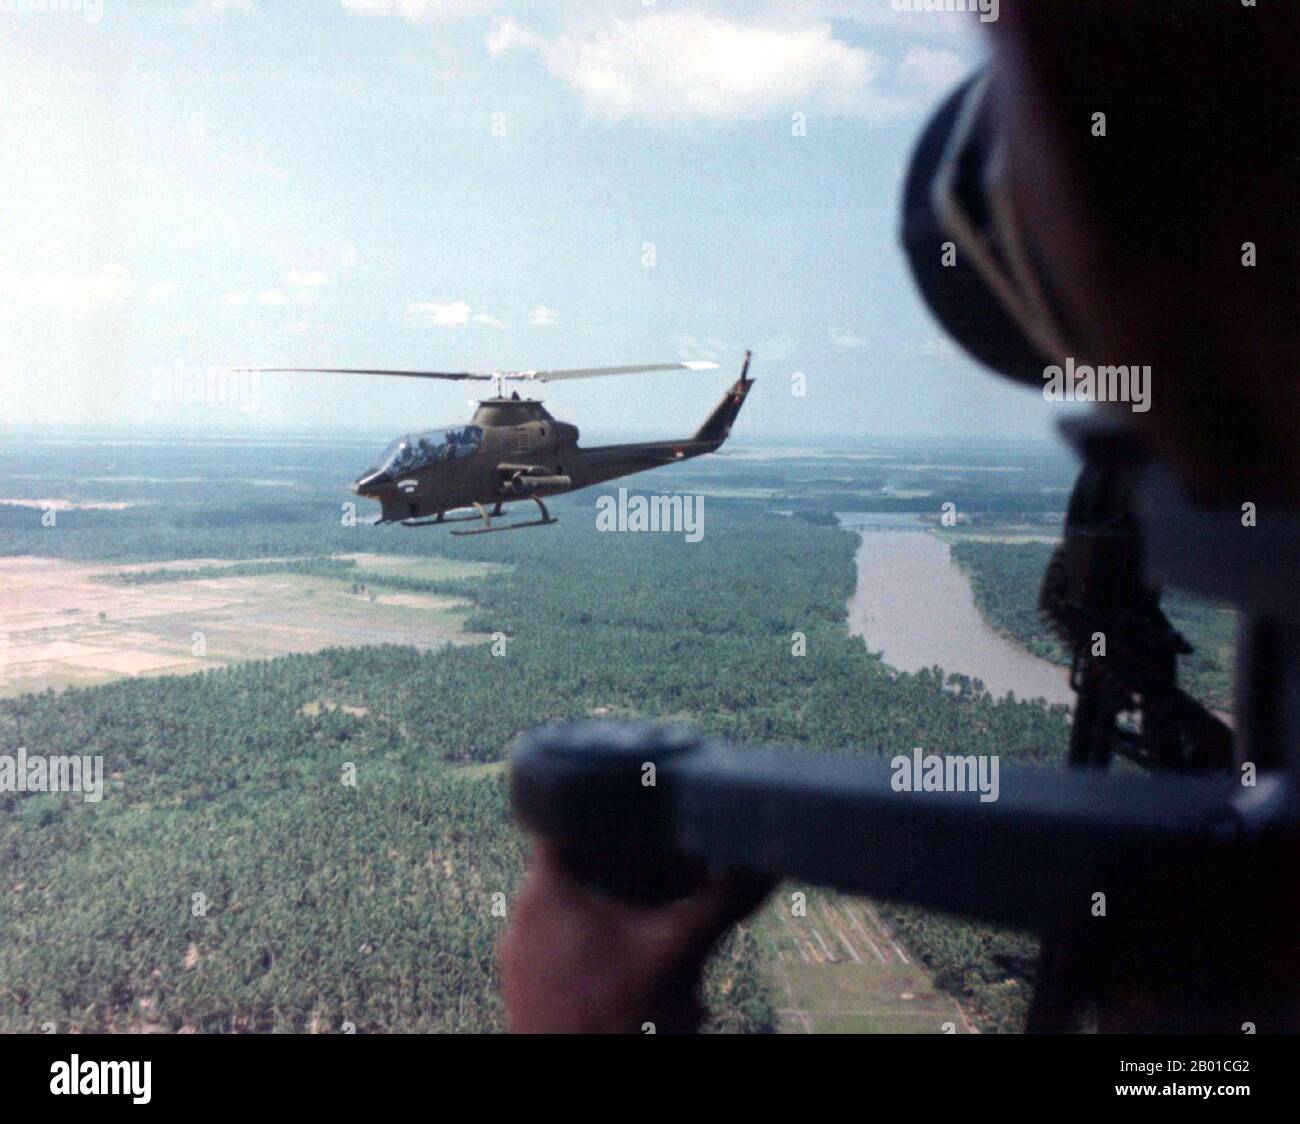 Vietnam: AH-1G Cobra helicopters over southern Vietnam, 1968.  The Second Indochina War, known in America as the Vietnam War, was a Cold War era military conflict that occurred in Vietnam, Laos, and Cambodia from 1 November 1955 to the fall of Saigon on 30 April 1975. This war followed the First Indochina War and was fought between North Vietnam, supported by its communist allies, and the government of South Vietnam, supported by the U.S. and other anti-communist nations. The U.S. government viewed involvement in the war as a way to prevent a communist takeover of South Vietnam. Stock Photo